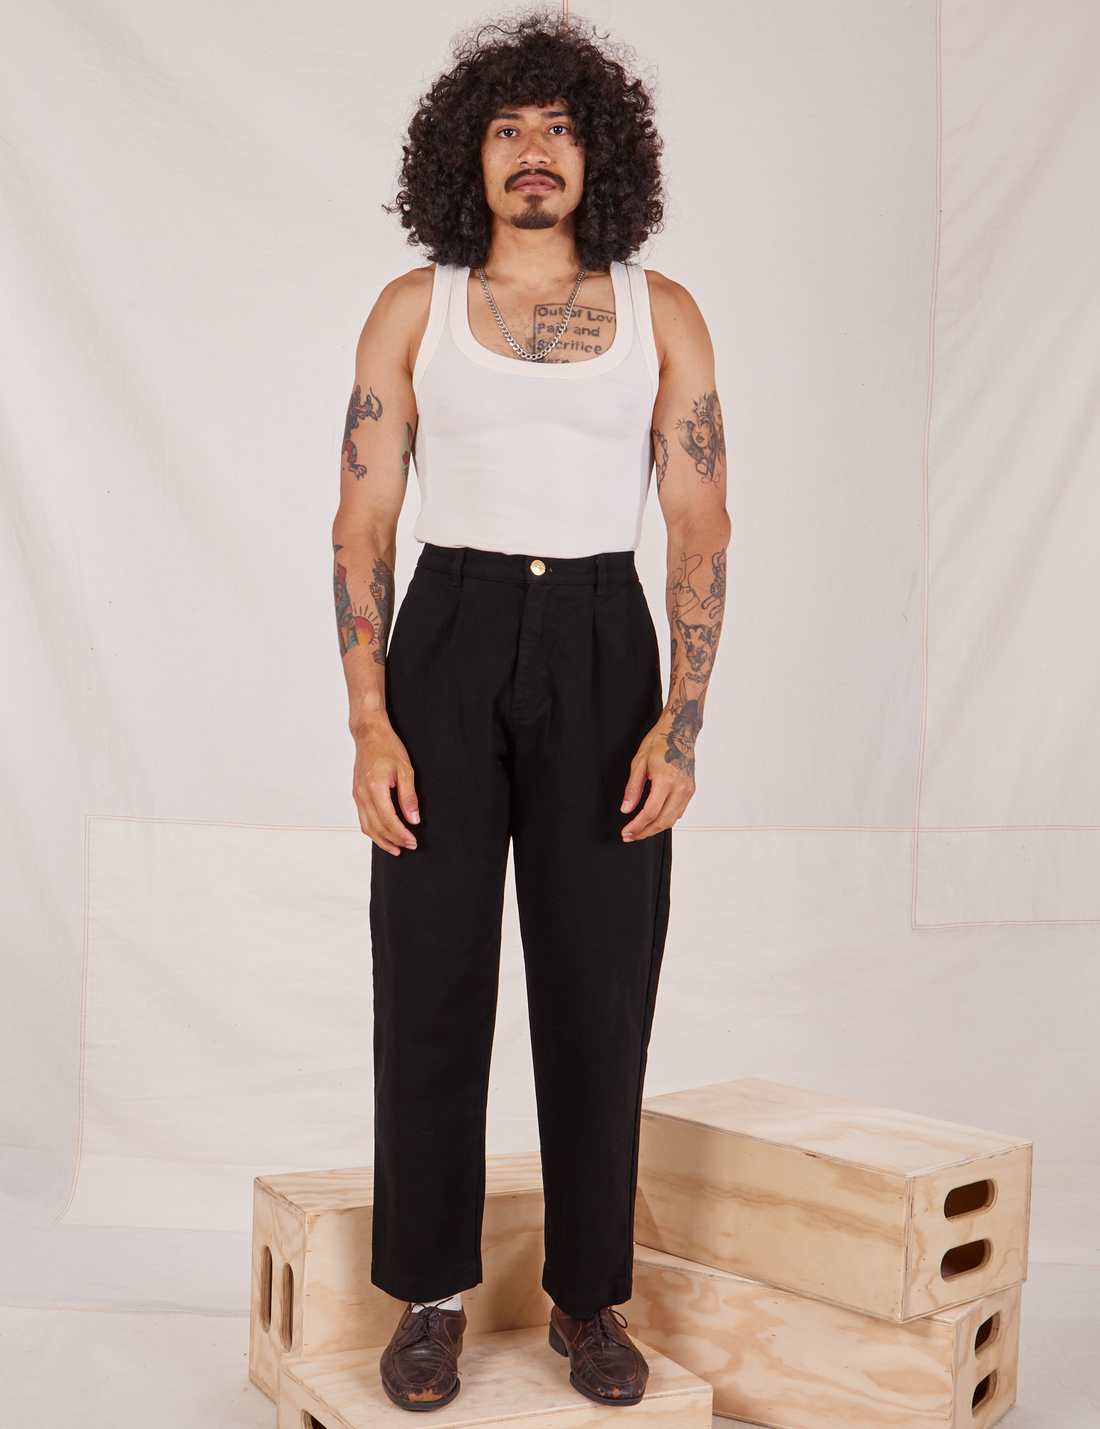 Jesse is 5'8" and wearing XXS Denim Trouser Jeans in Black paired with a vintage off-white Tank Top